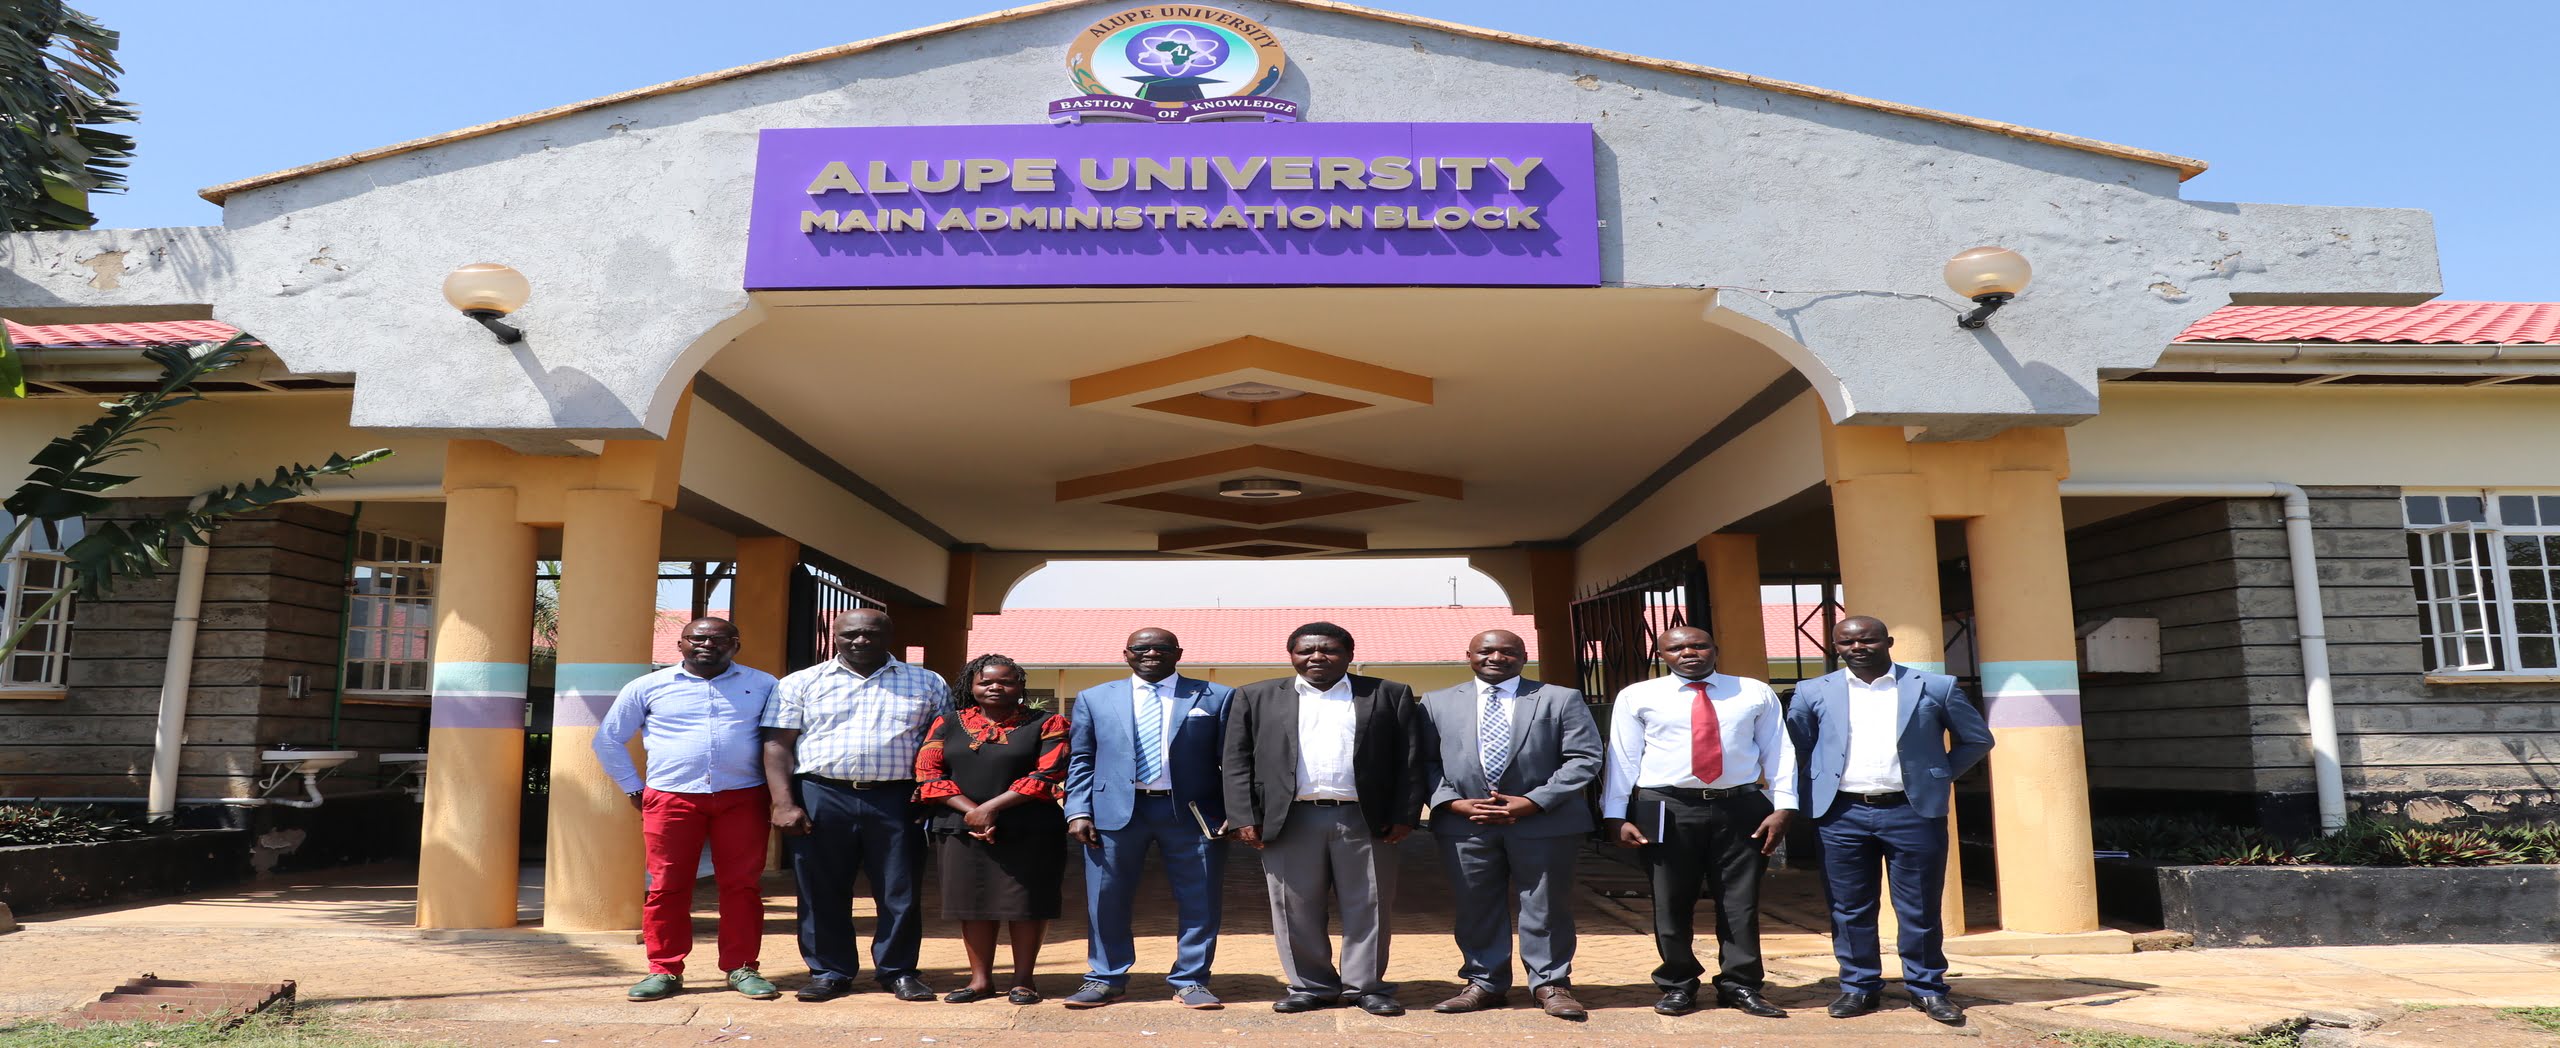 Courtesy visit by Chairman of Kenya institute of supplies management to Alupe University Procurement Office.